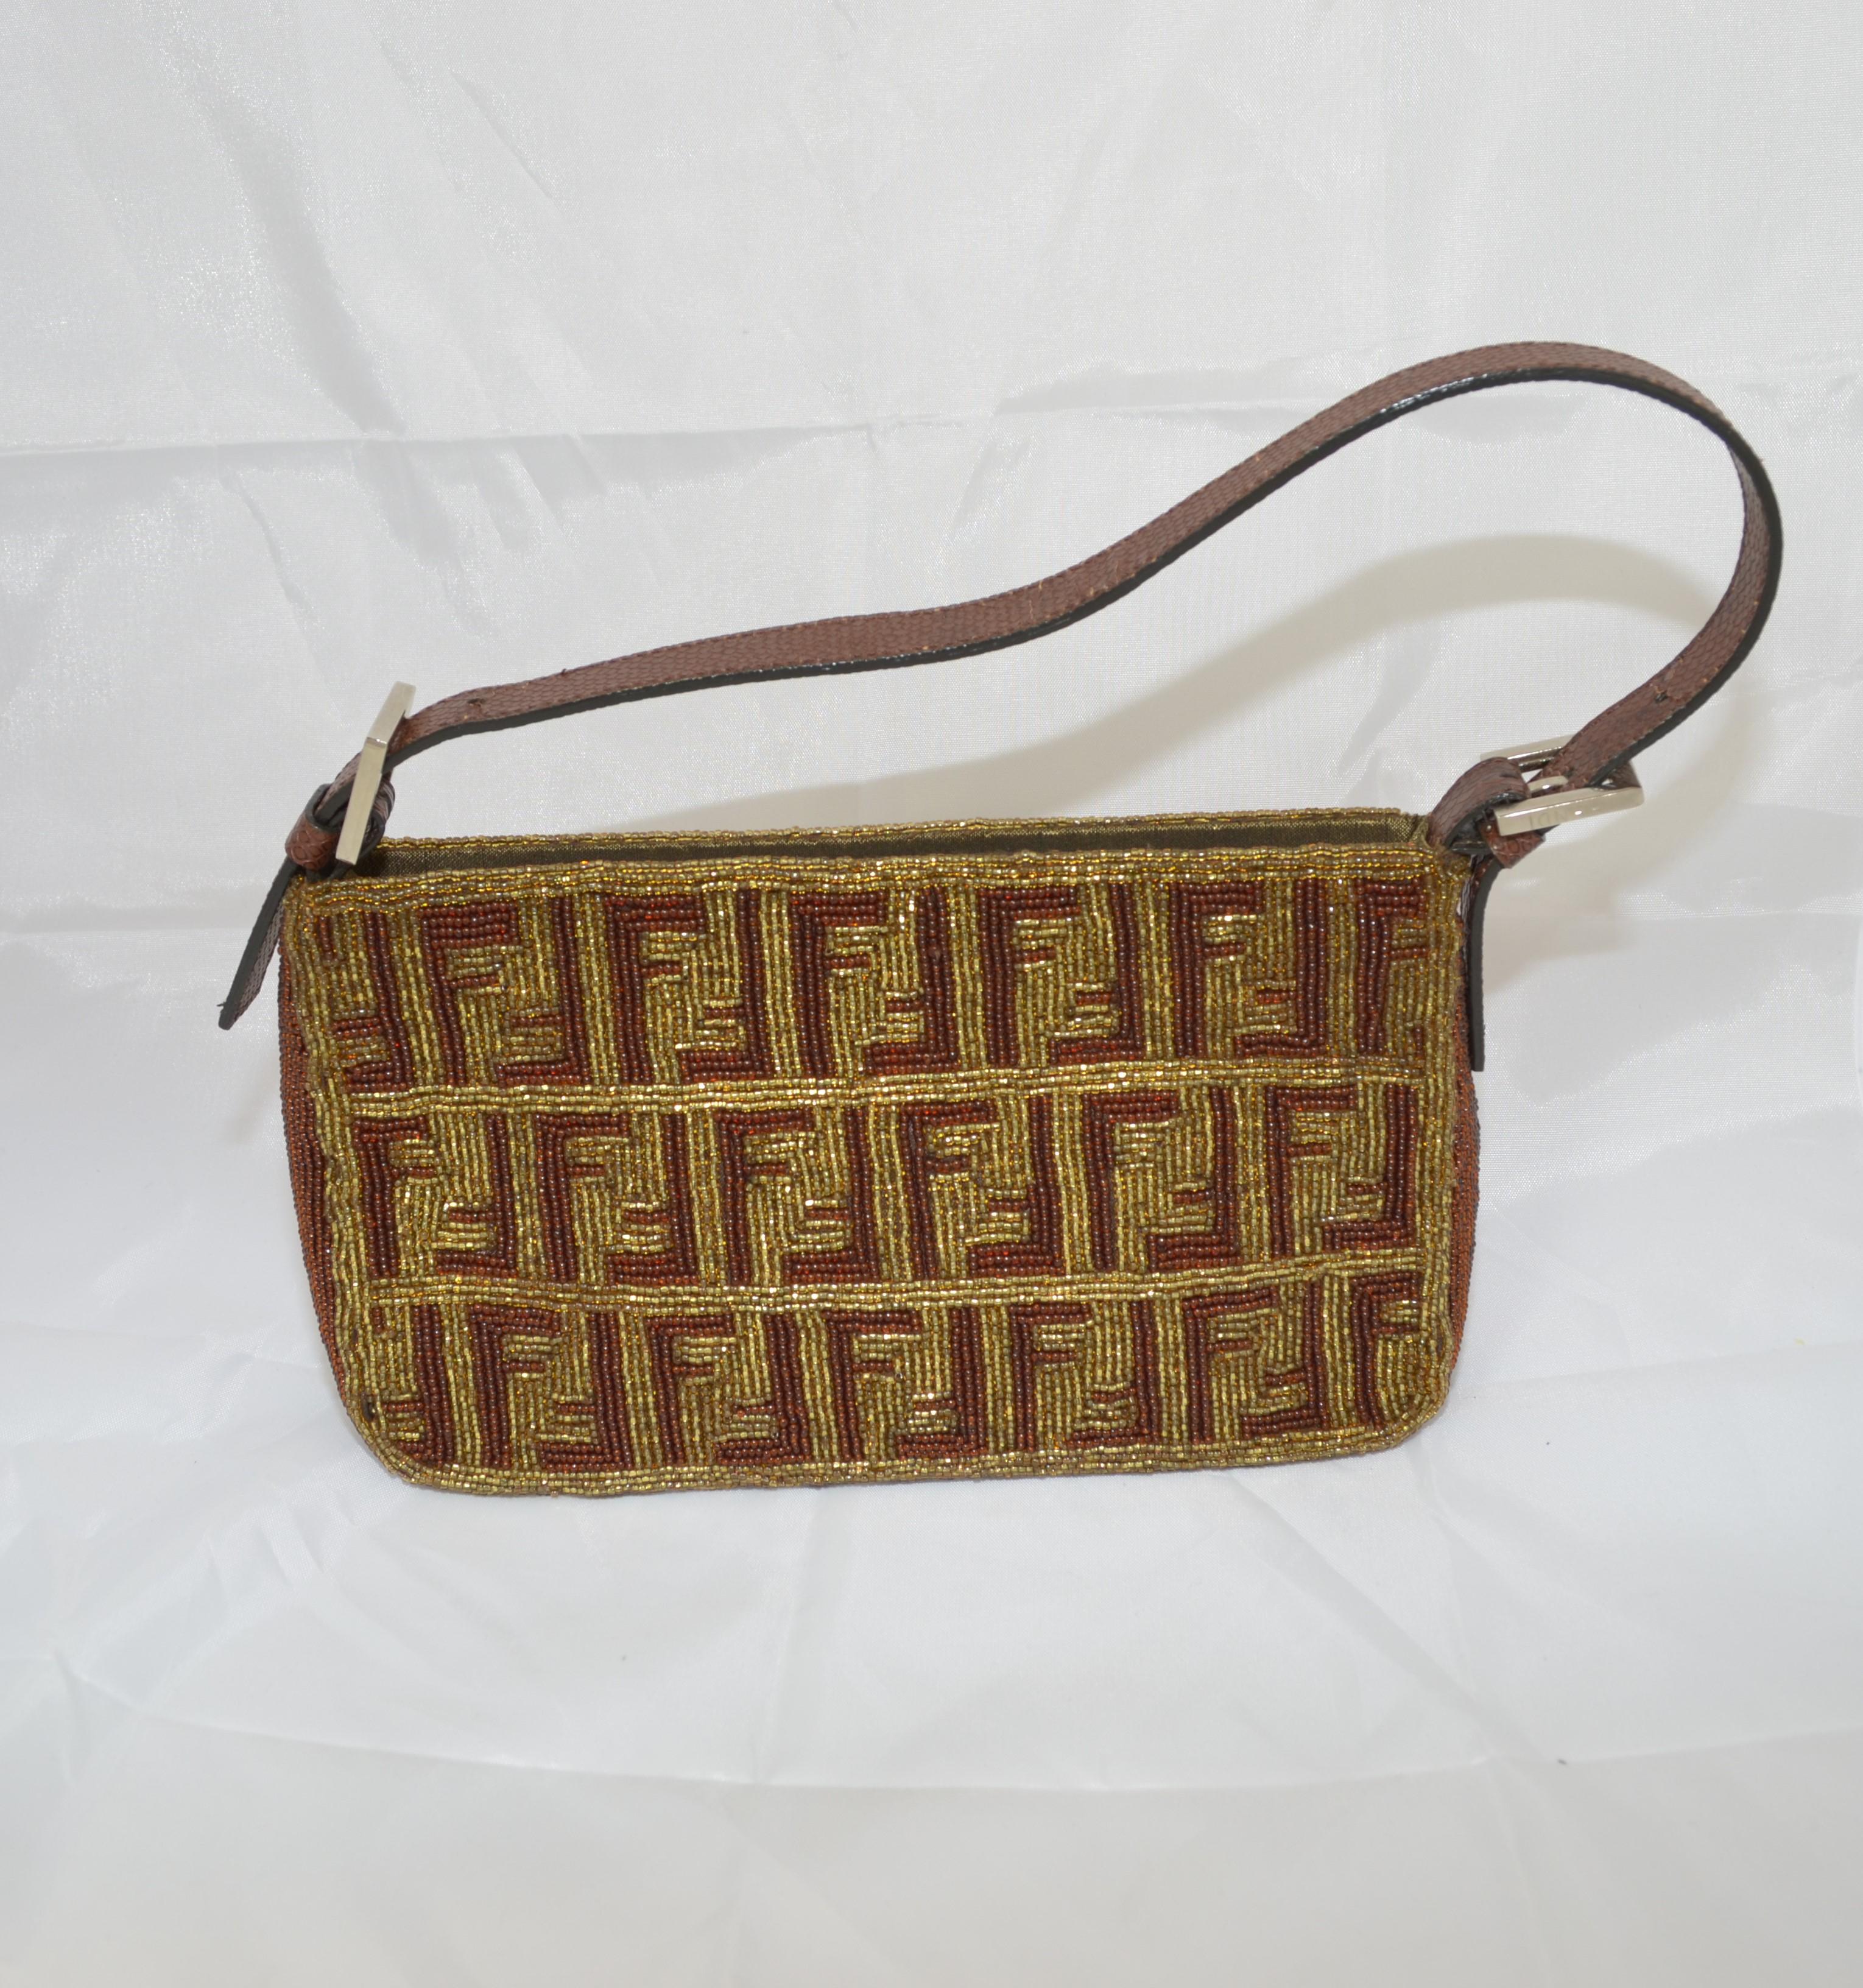 Fendi Beaded Baguette Shoulder Bag with Zucca Design — fully covered in brown and tan beads with a snakeskin design to the shoulder strap and a zippered closure. Bag has silver hardware throughout and is fully lined in jacquard with one zipper